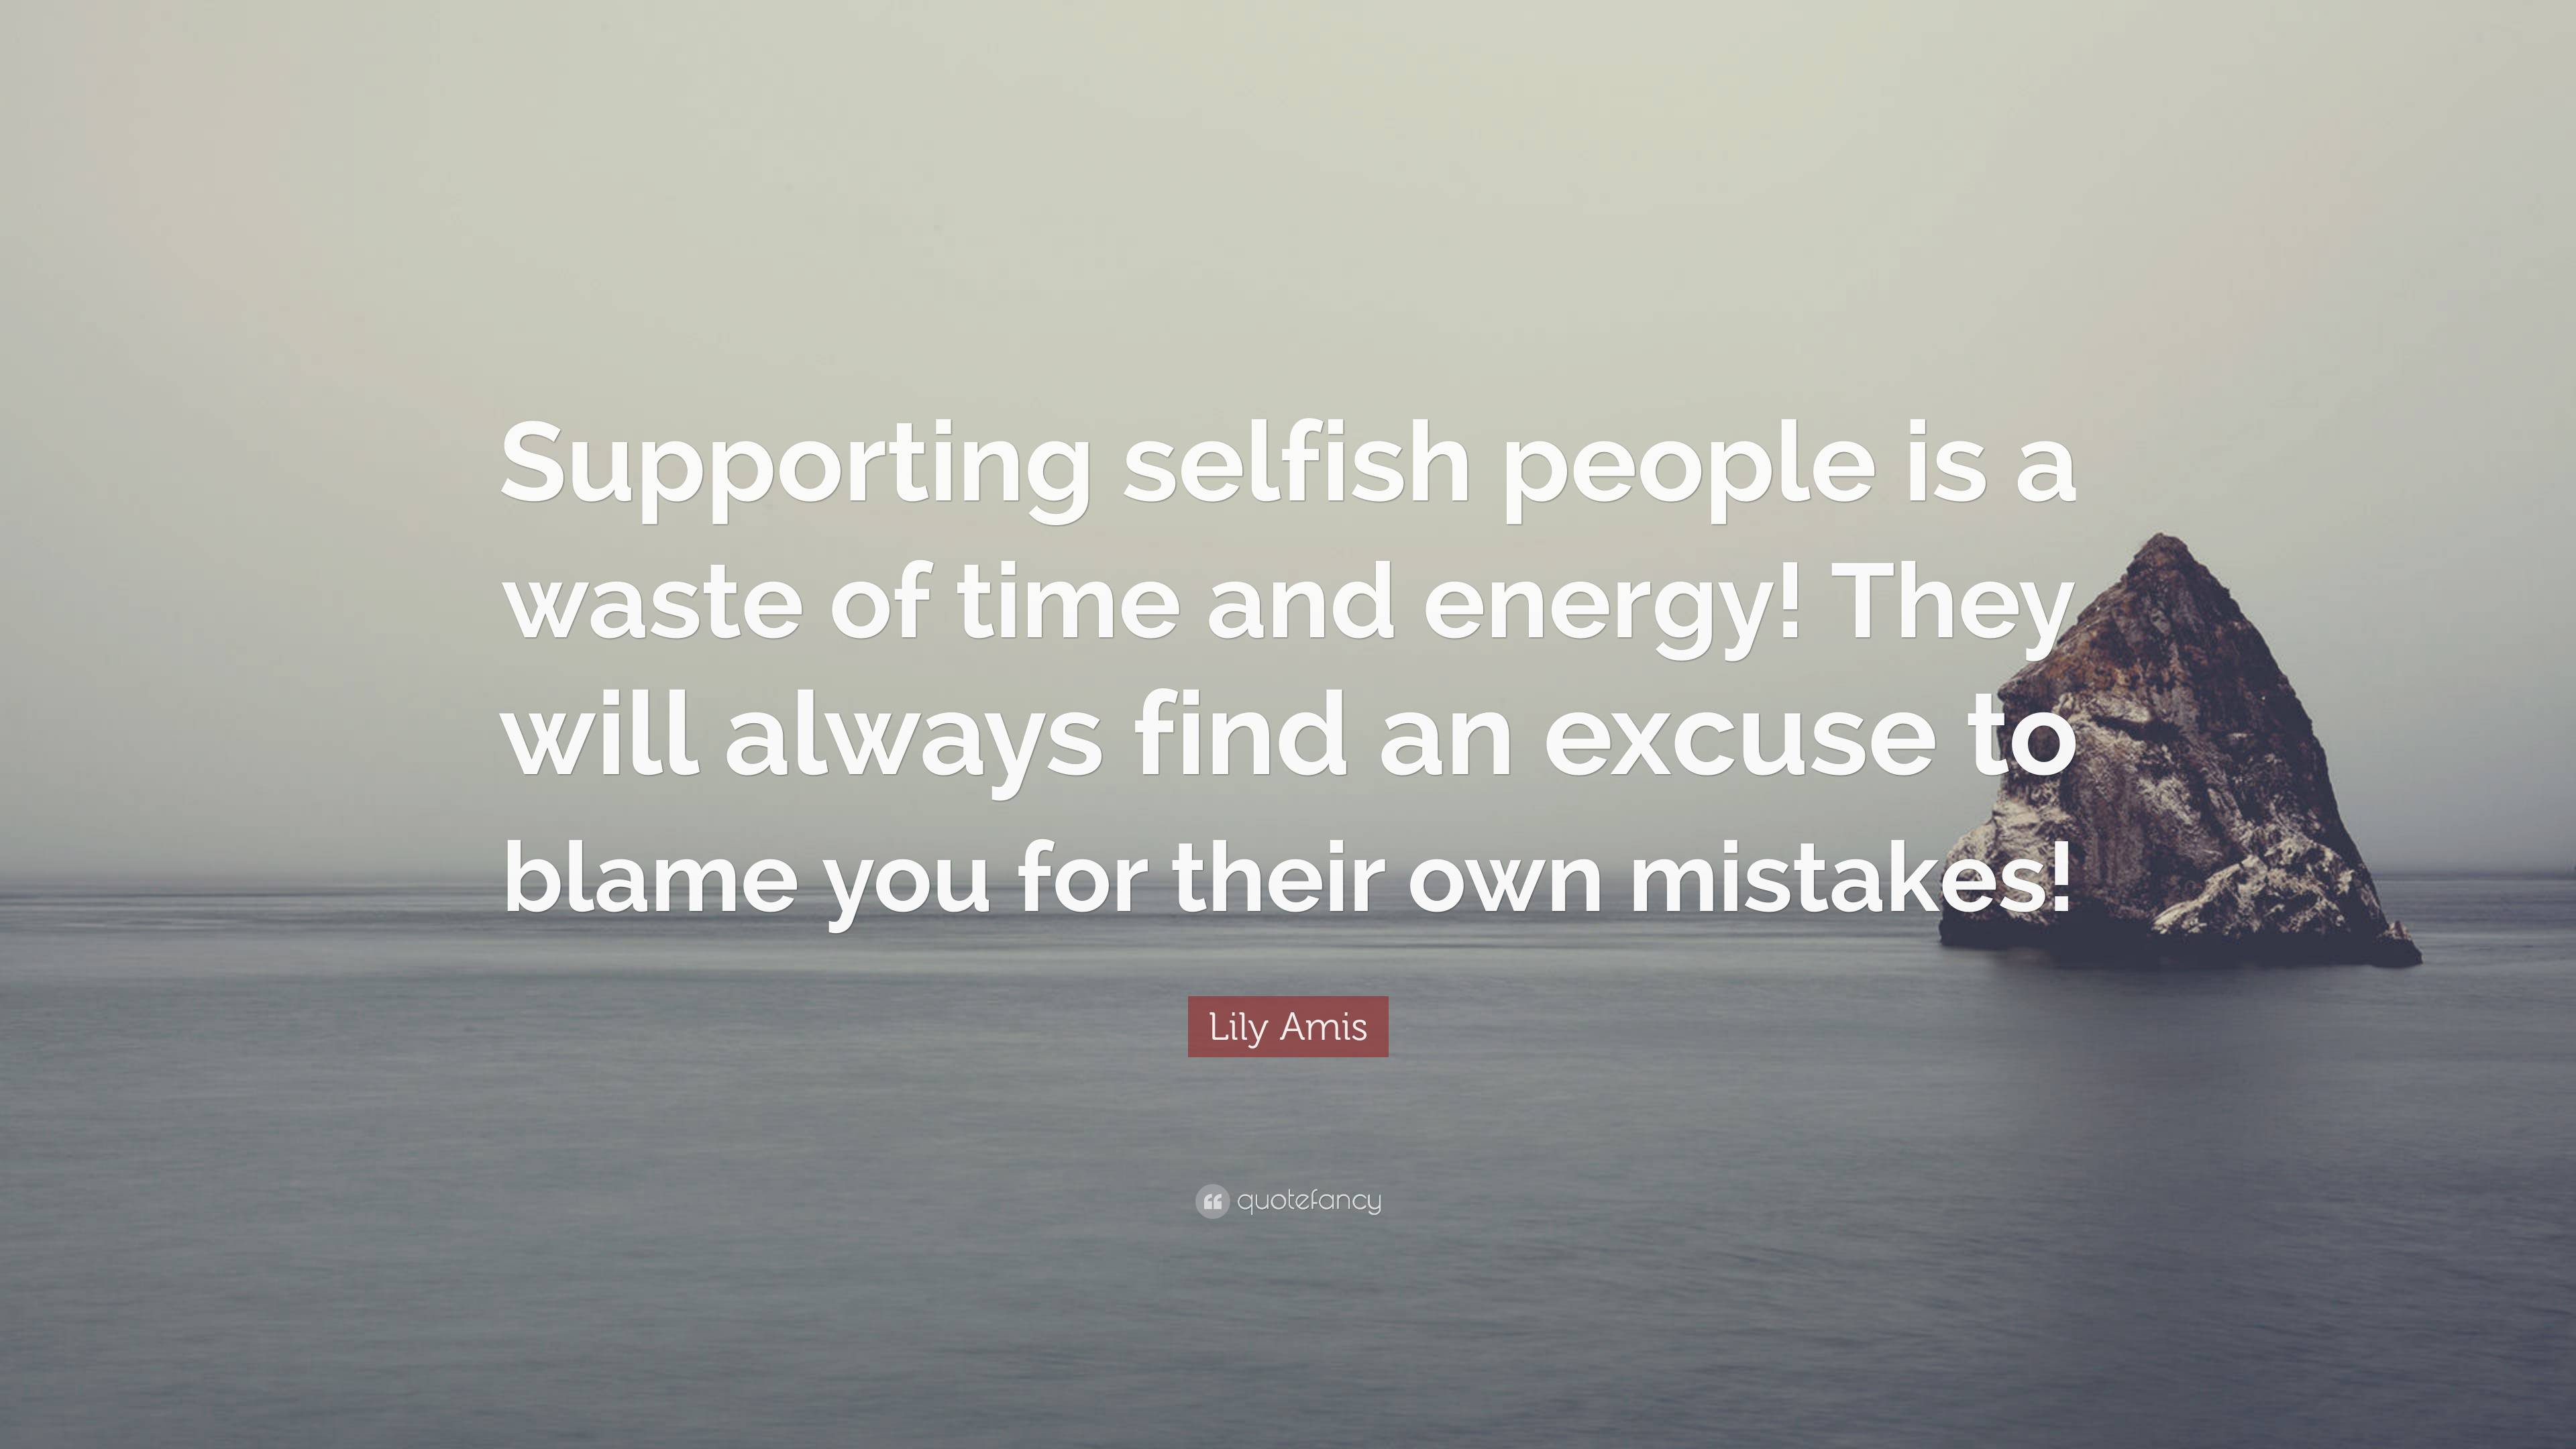 Lily Amis Quote: “Supporting selfish people is a waste of time and ...